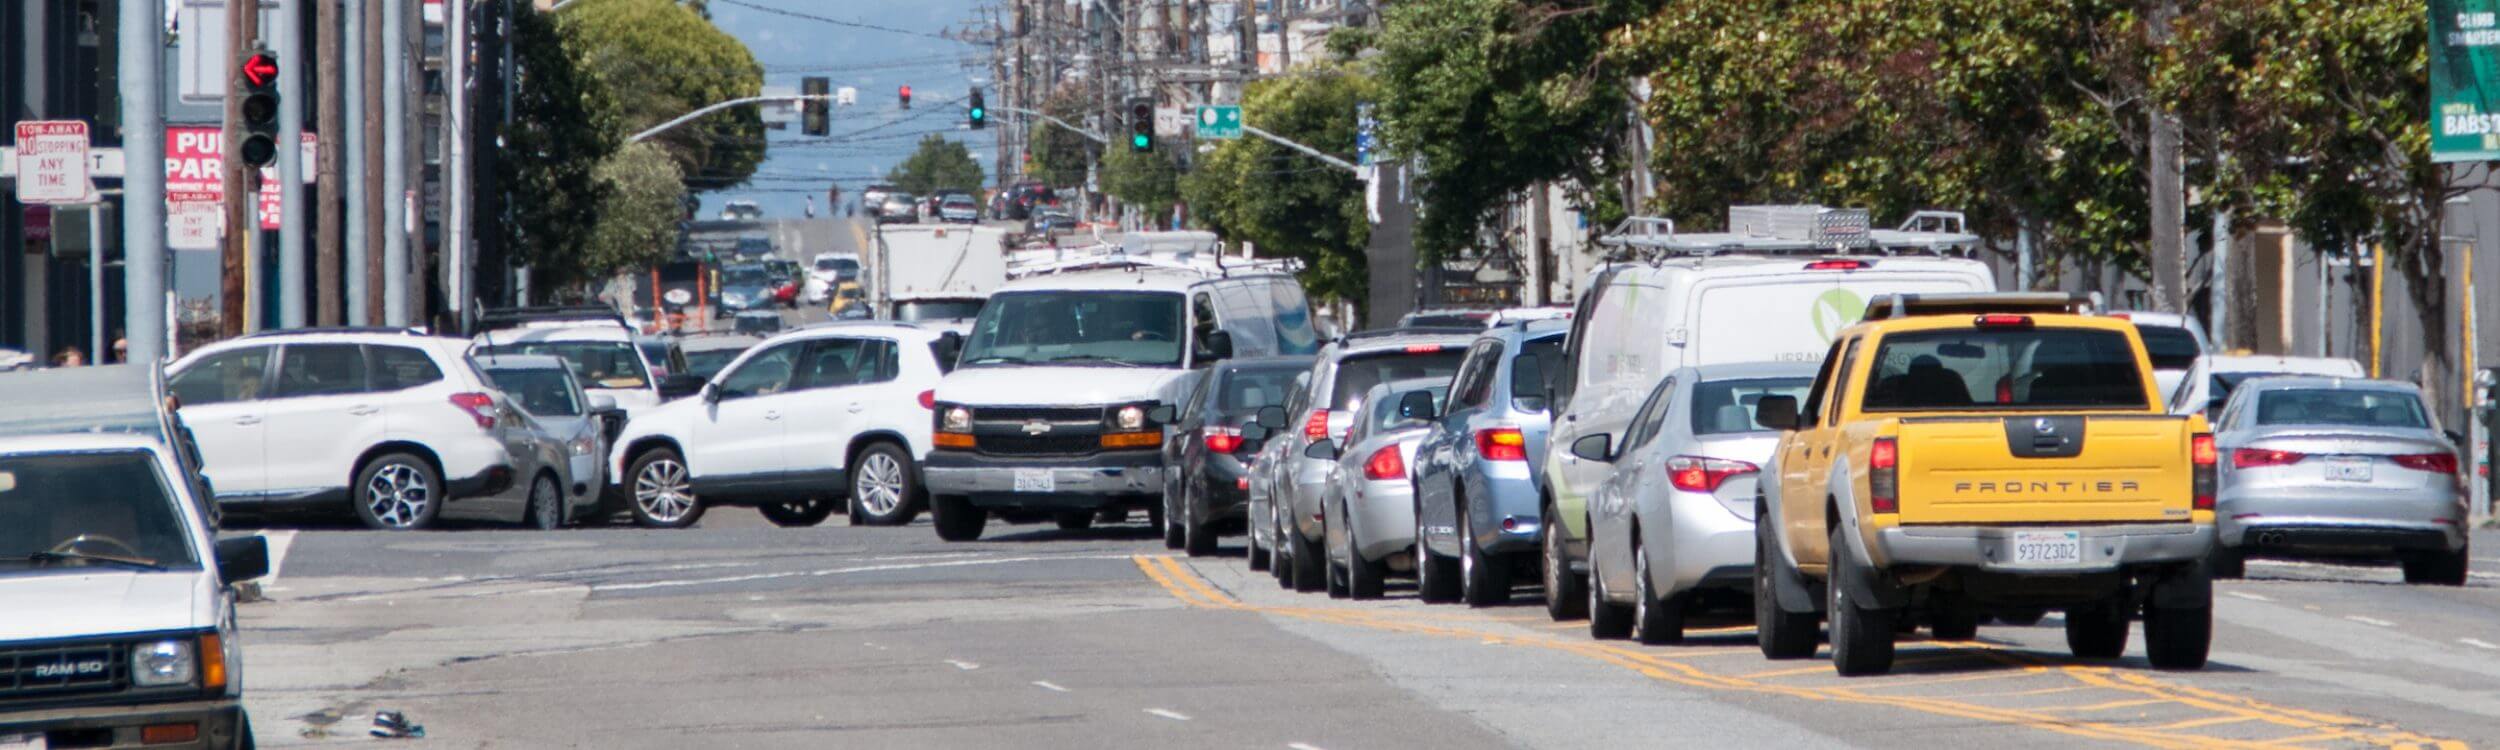 Safety fixes for 5th Street, Mission Street, and Geneva Boulevard are in motion